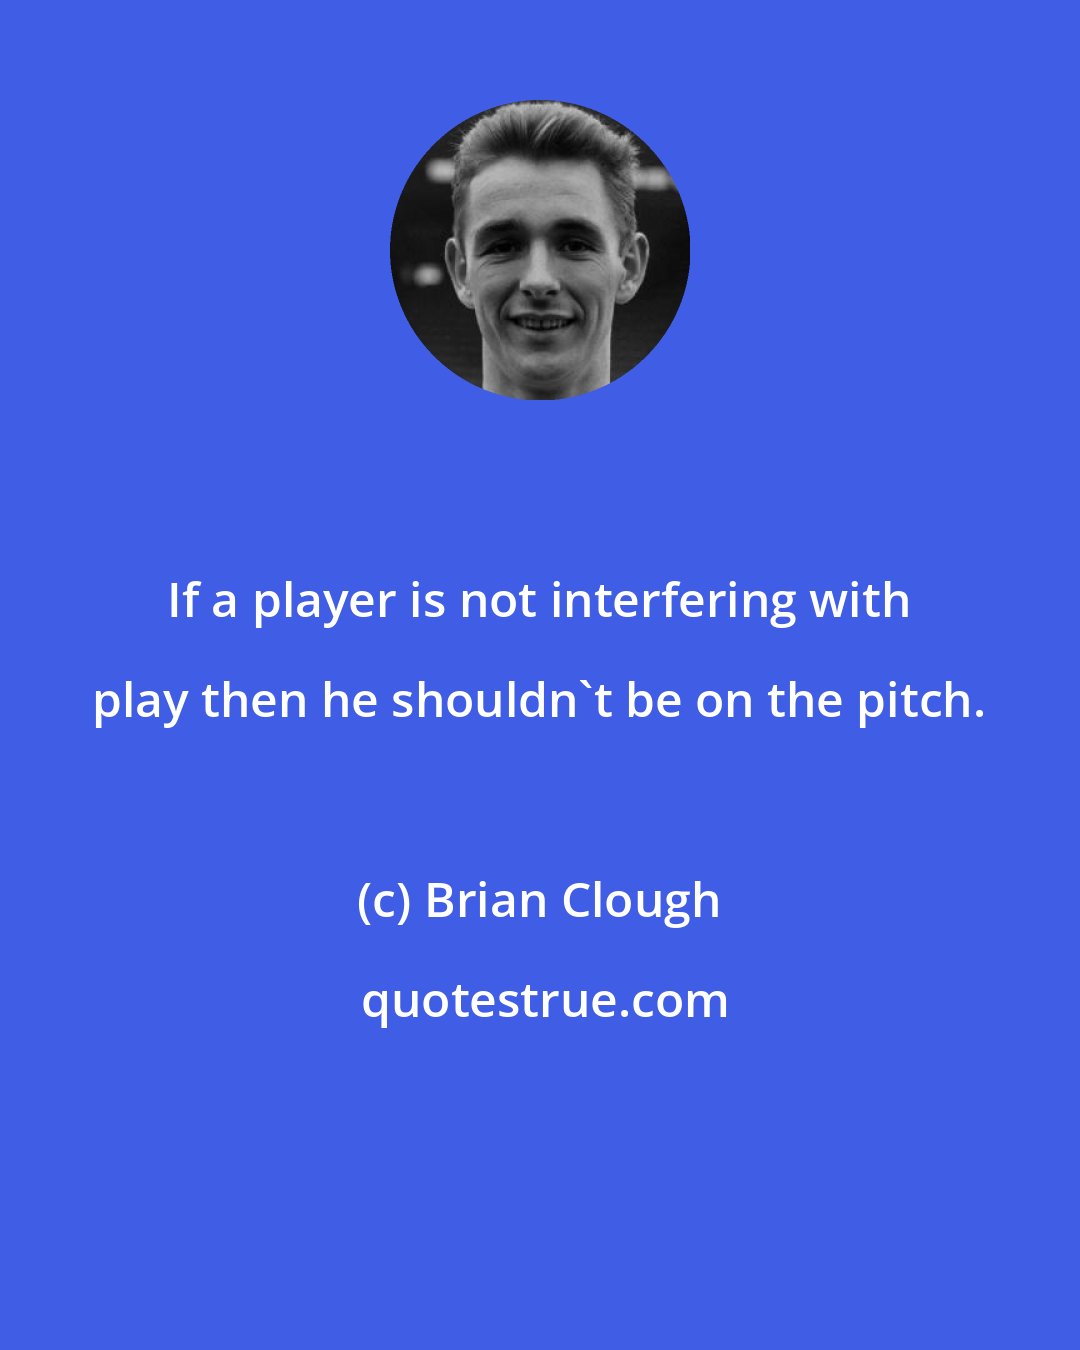 Brian Clough: If a player is not interfering with play then he shouldn't be on the pitch.